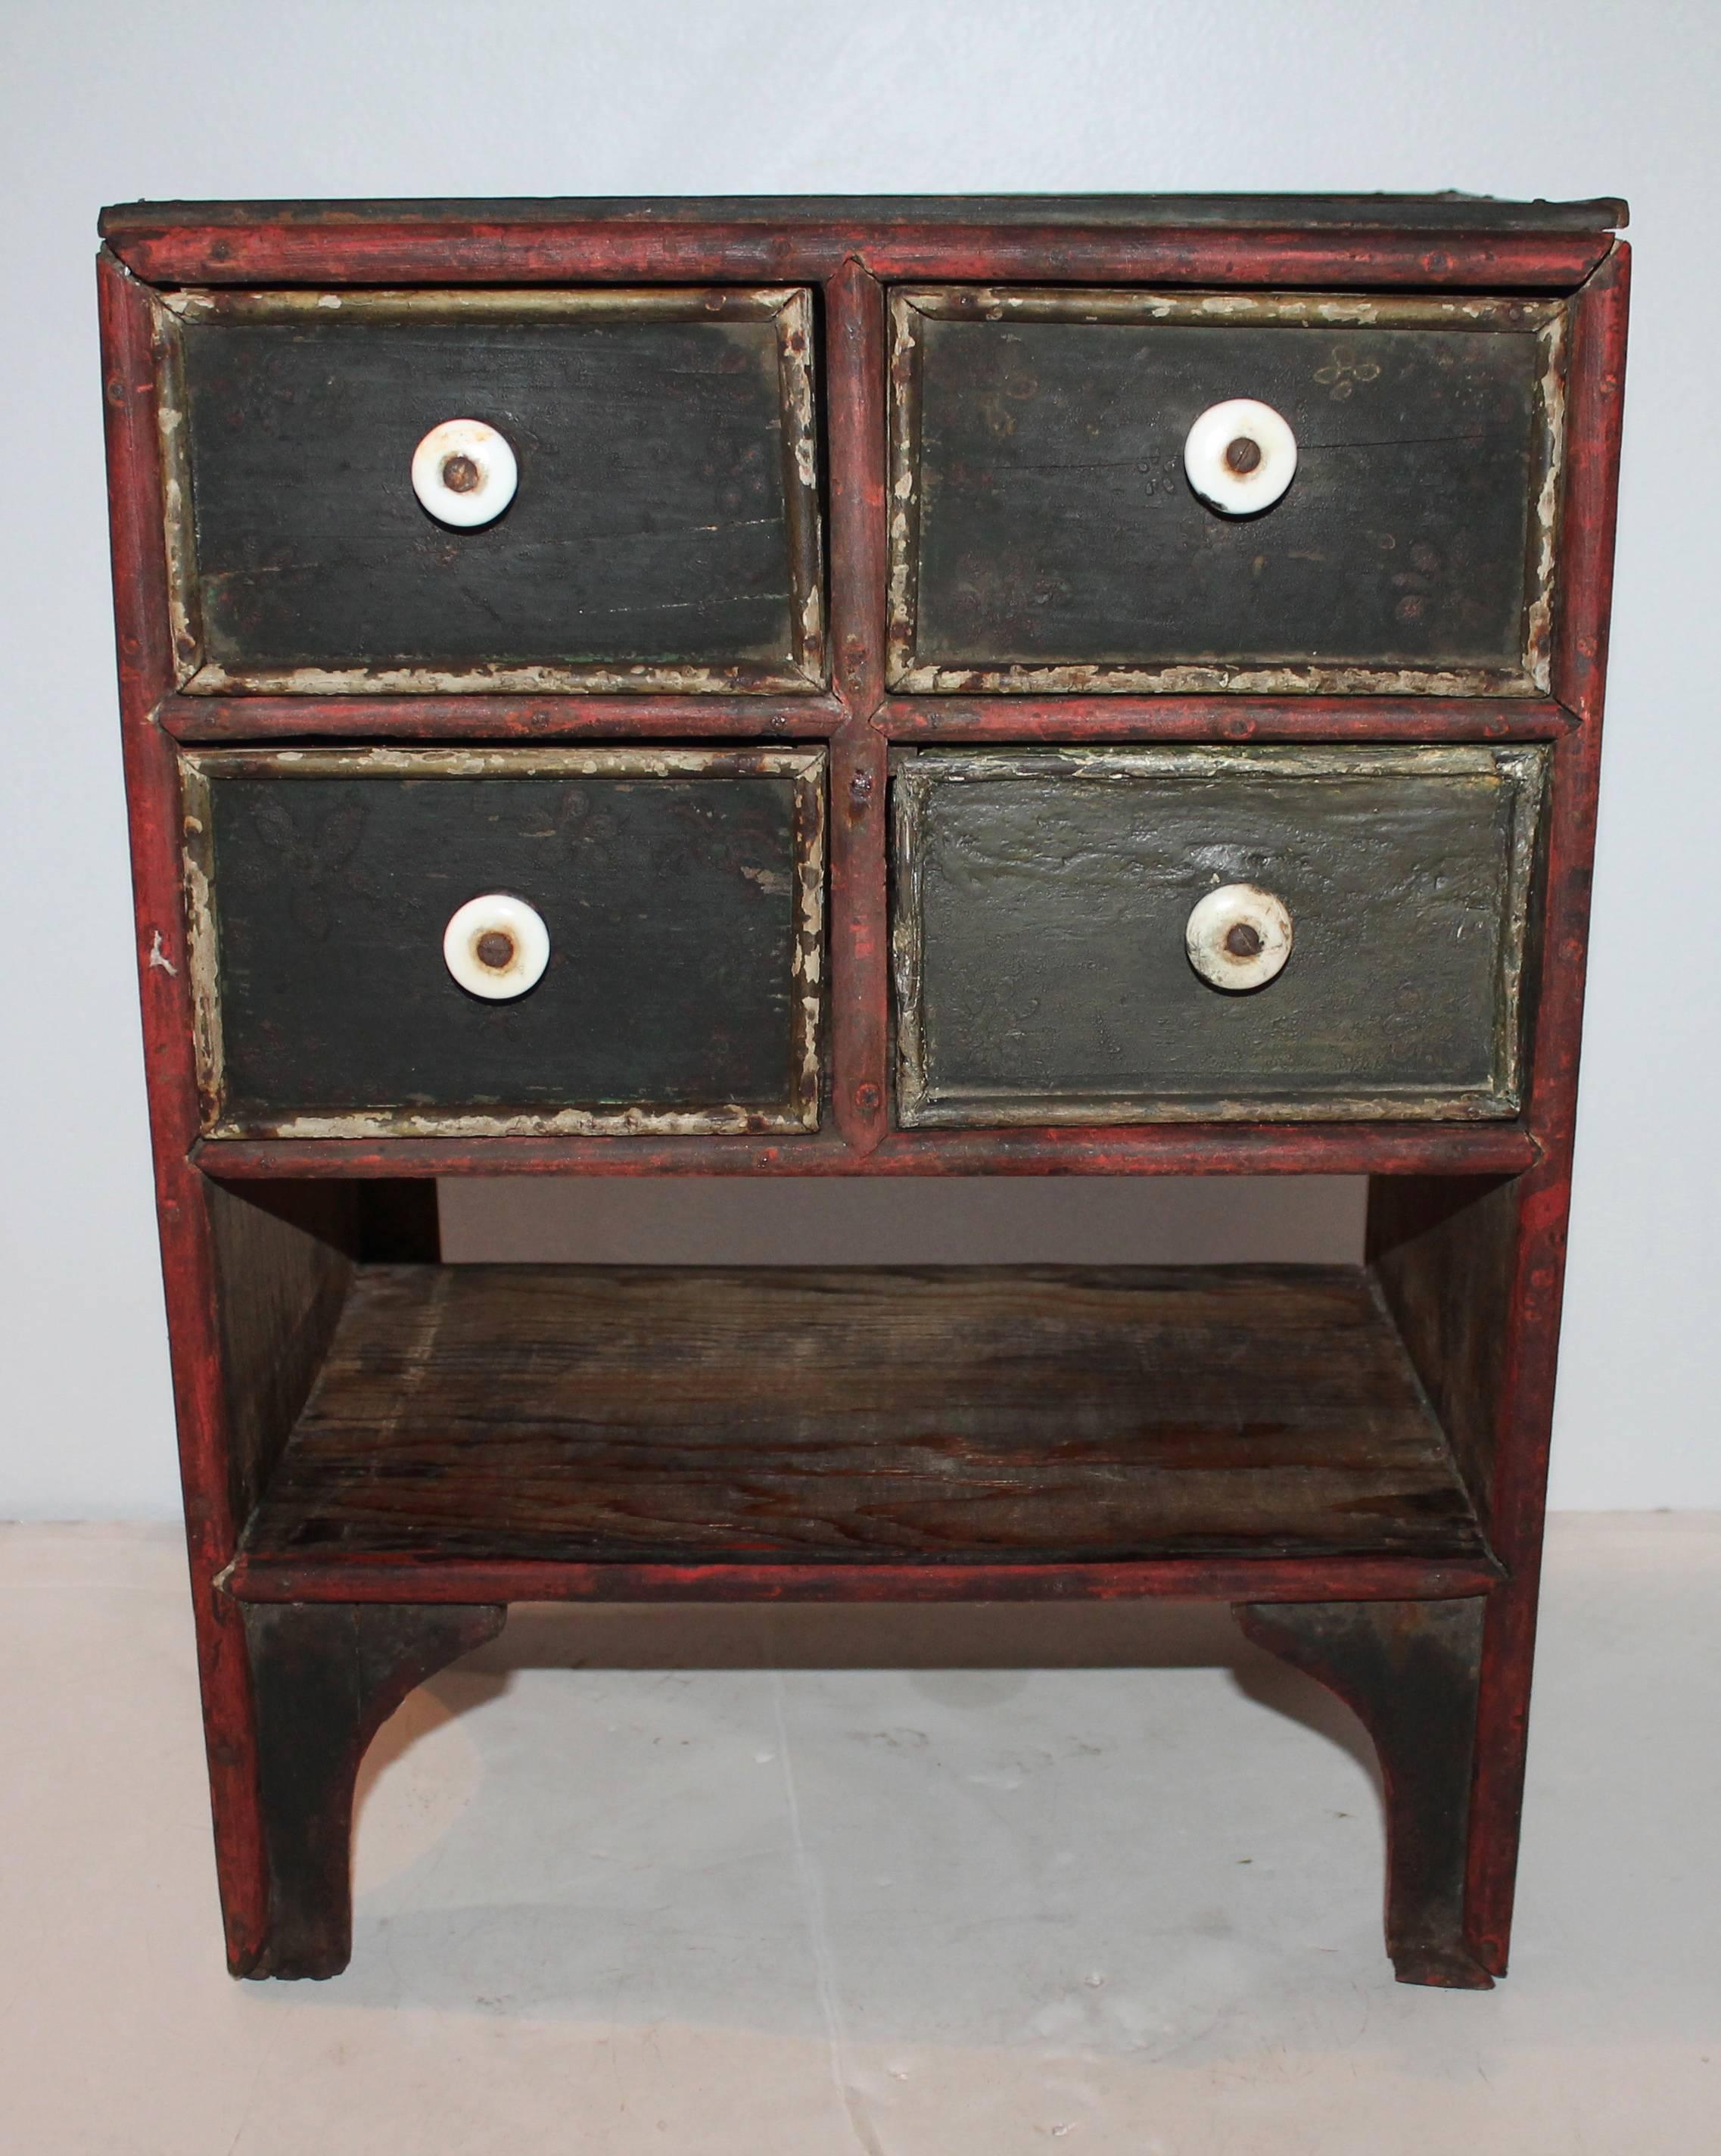 This amazing fancy paint decorated tabletop 19th century apothecary cabinet has all the original drawers and hardware with tiny cut nail construction. The decoration has a hex sign or Pennsylvania Dutch symbol on the top and both sides. There is no